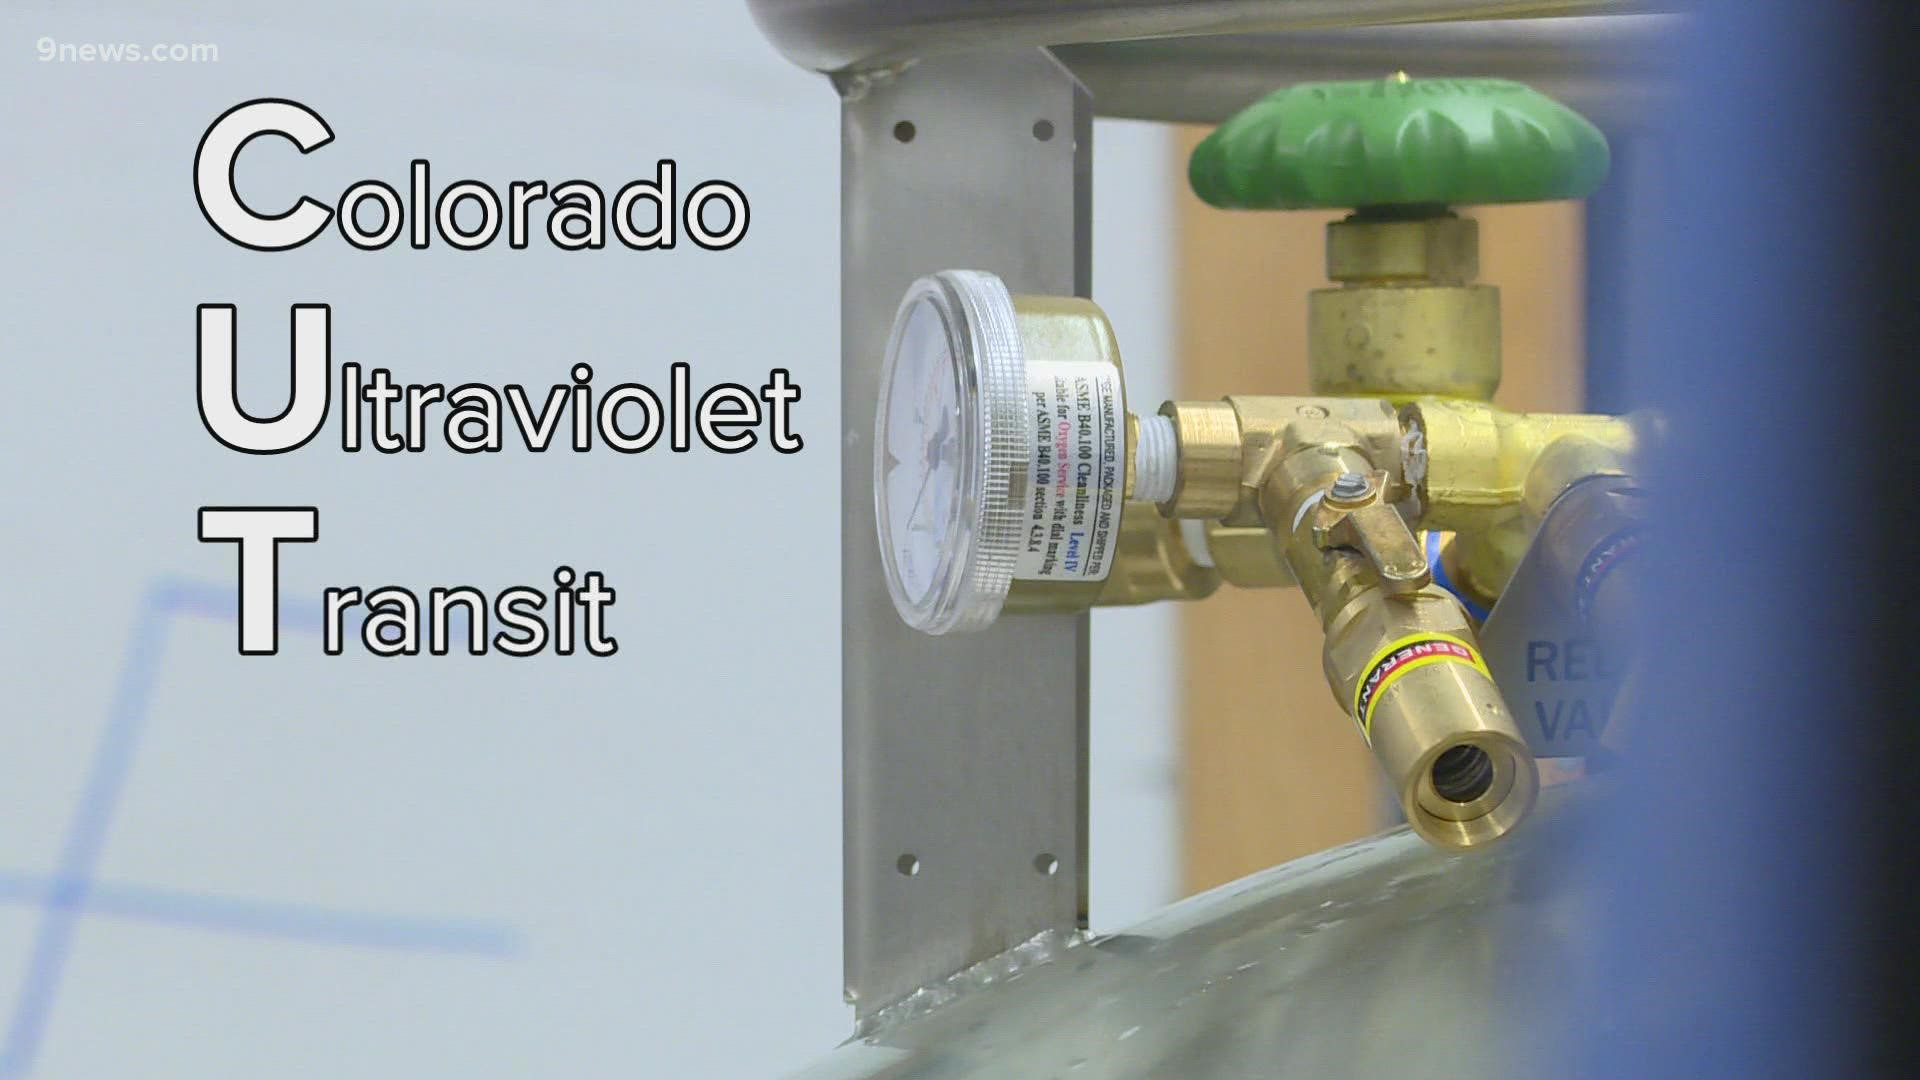 The Colorado Ultraviolet Transit Experiment (CUTE) satellite will be launched on Sept. 27 and orbit earth for two and a half years.